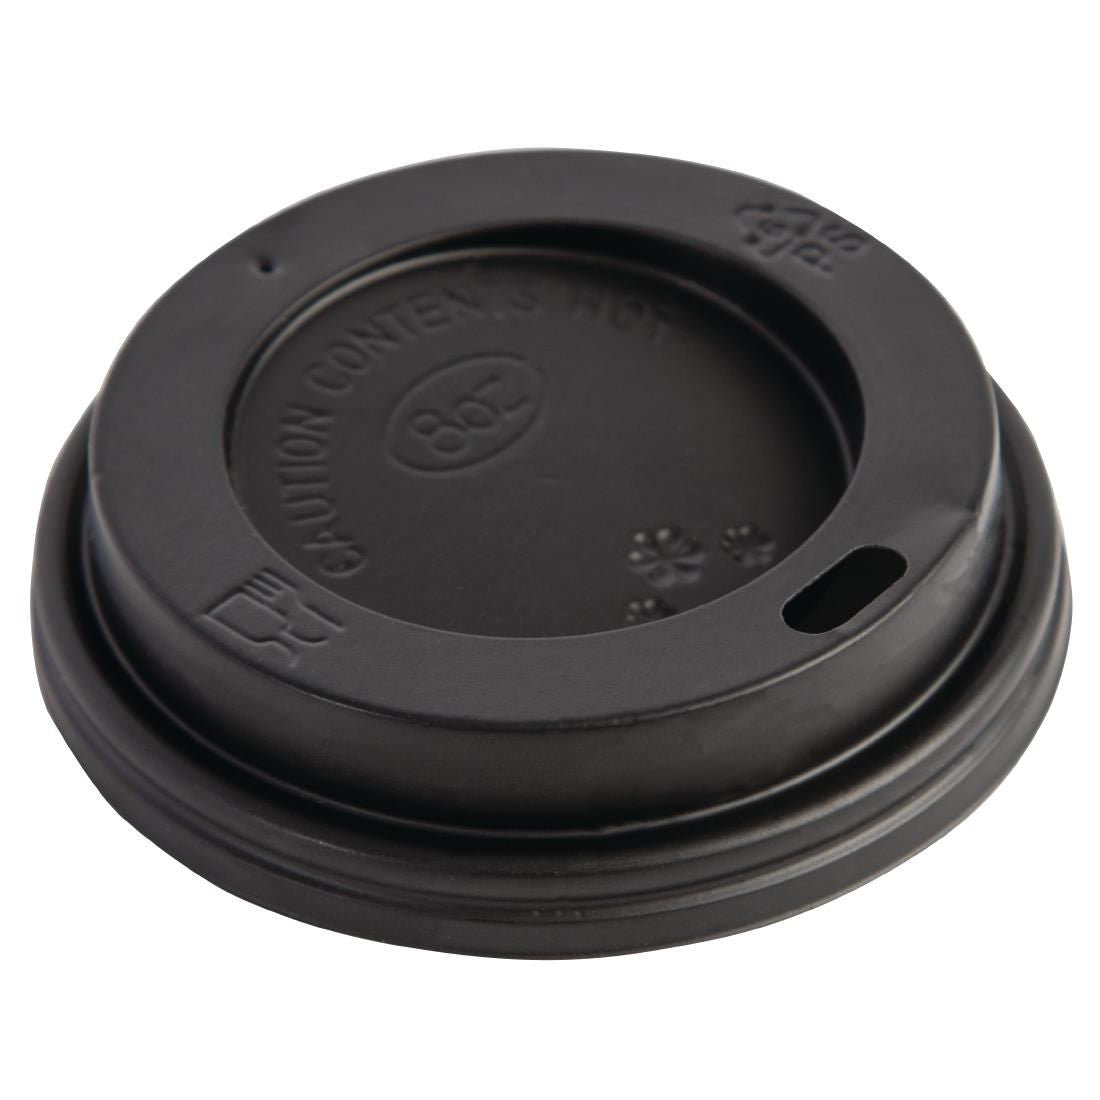 Fiesta Disposable Coffee Cup Lids Black 225ml / 8oz (Pack of 50) - CW715 Disposable Cups Fiesta   